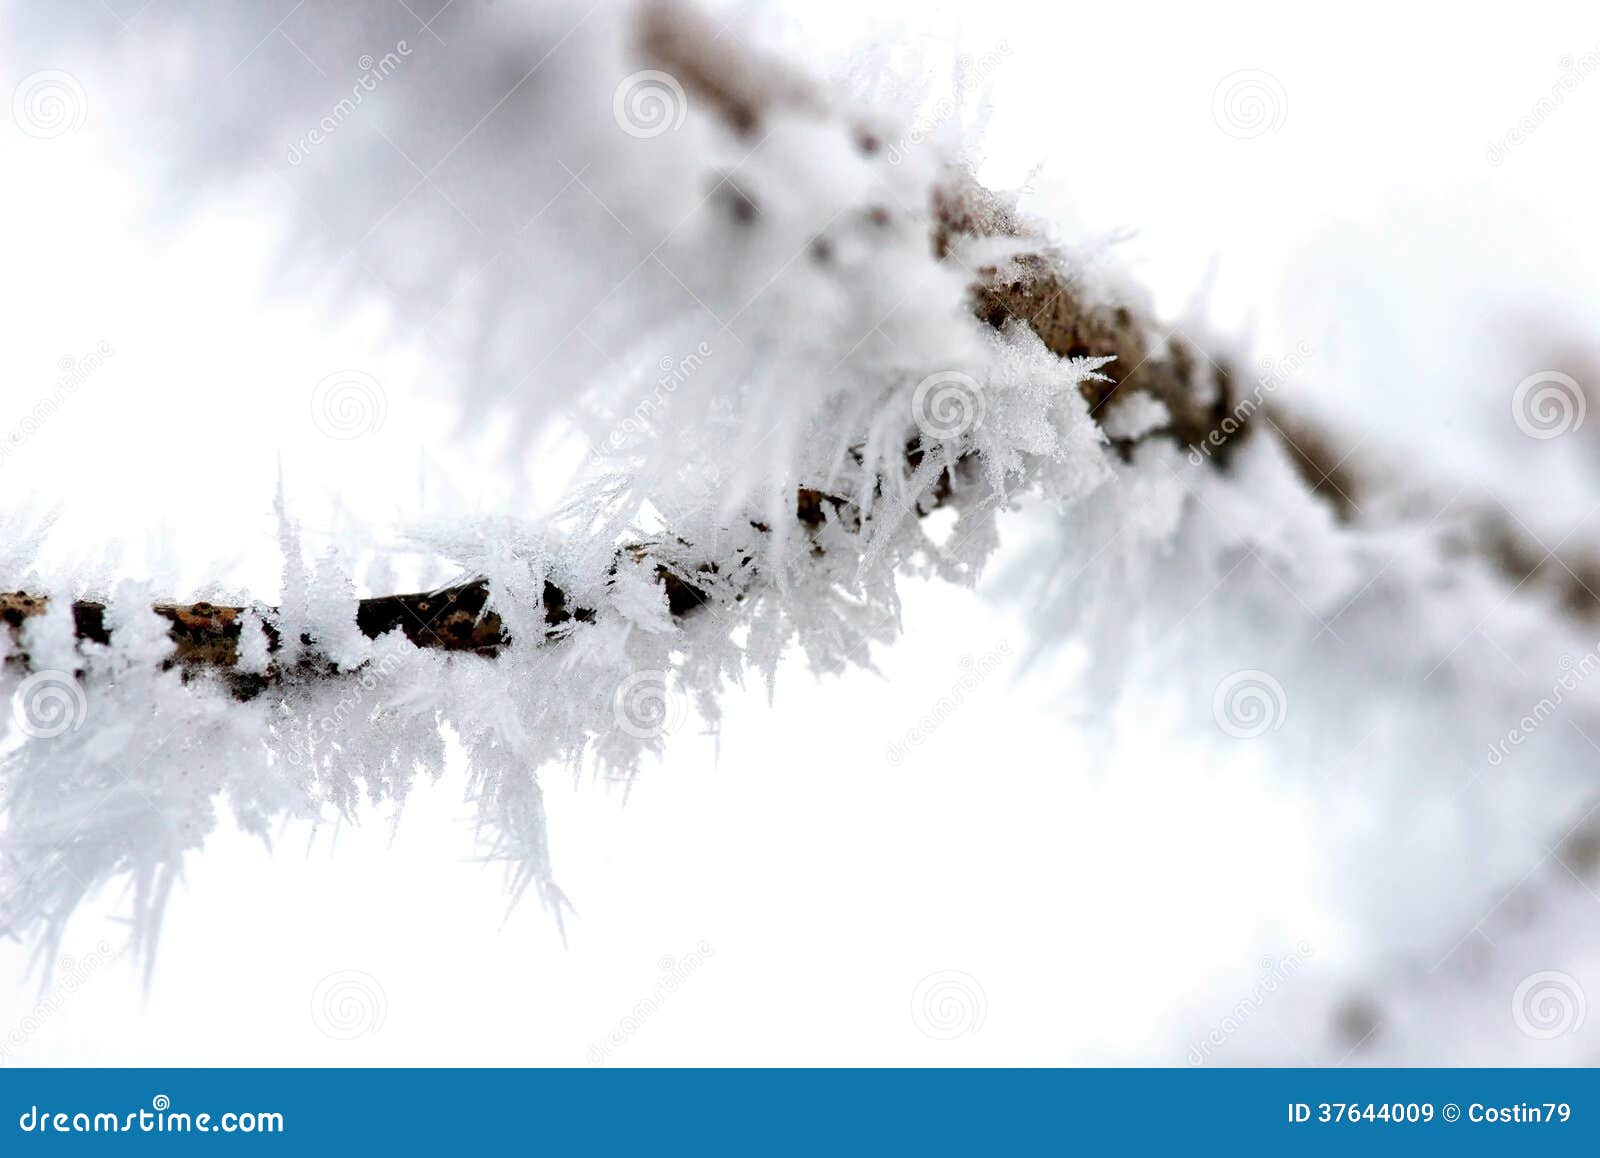 Ice needles stock image. Image of snow, freeze, abstract - 37644009